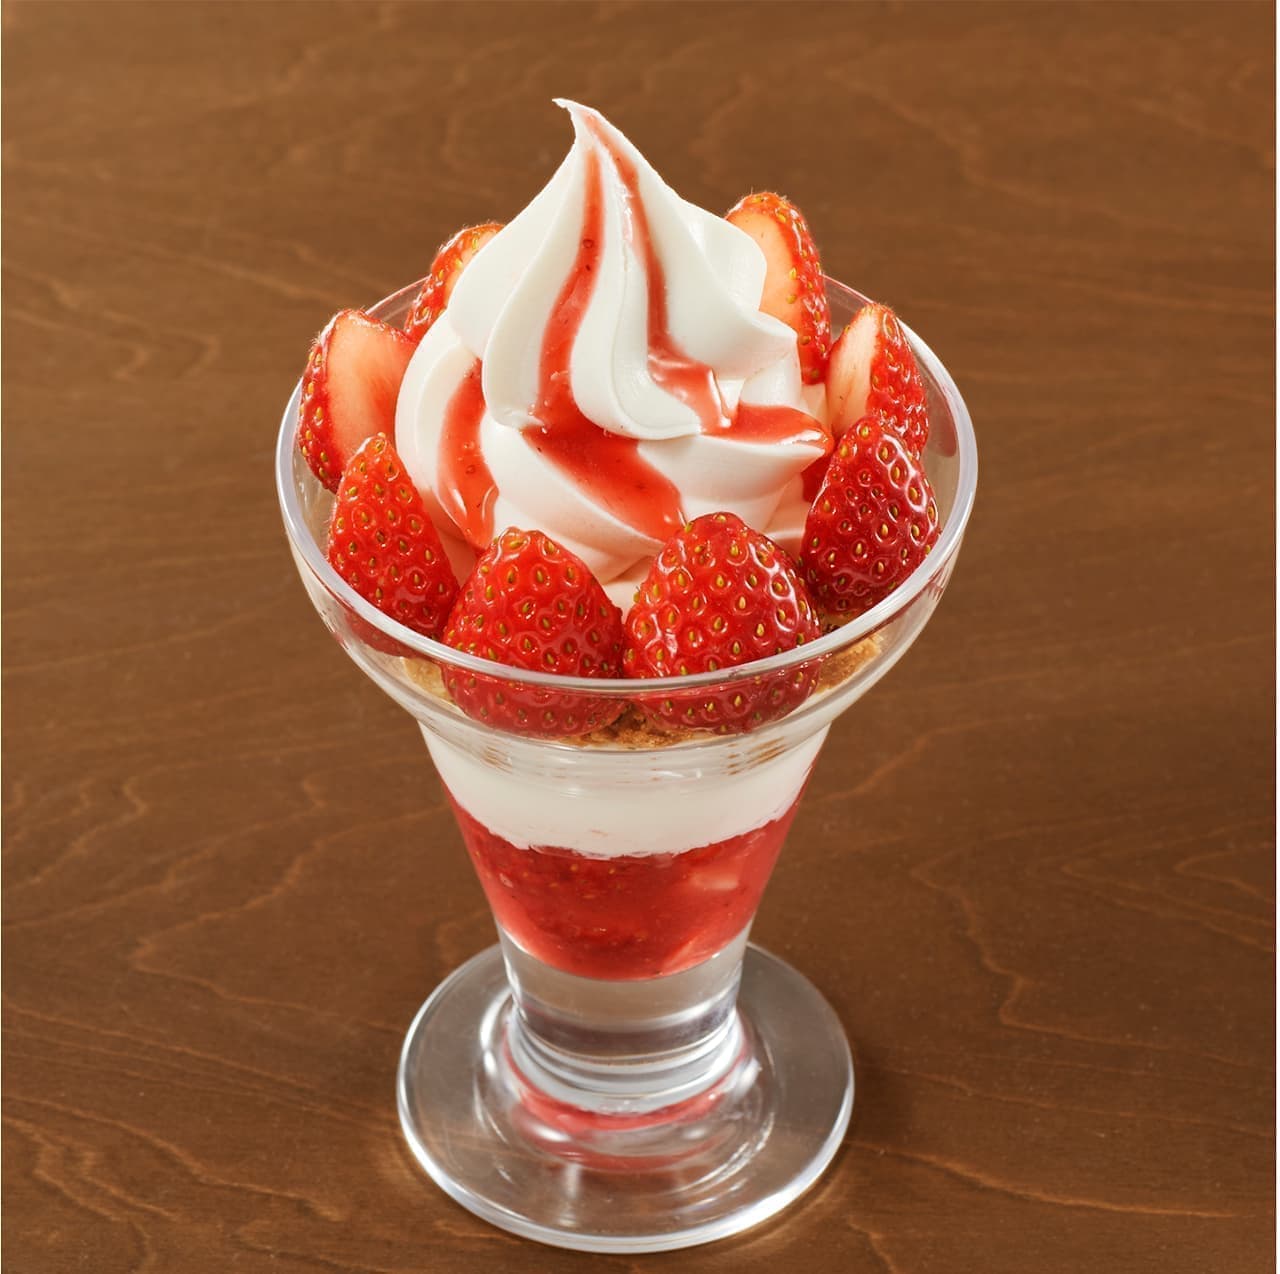 "Strawberry Parfait" "Strawberry Short in a Glass" at MUJI Cafe & Meal MUJI